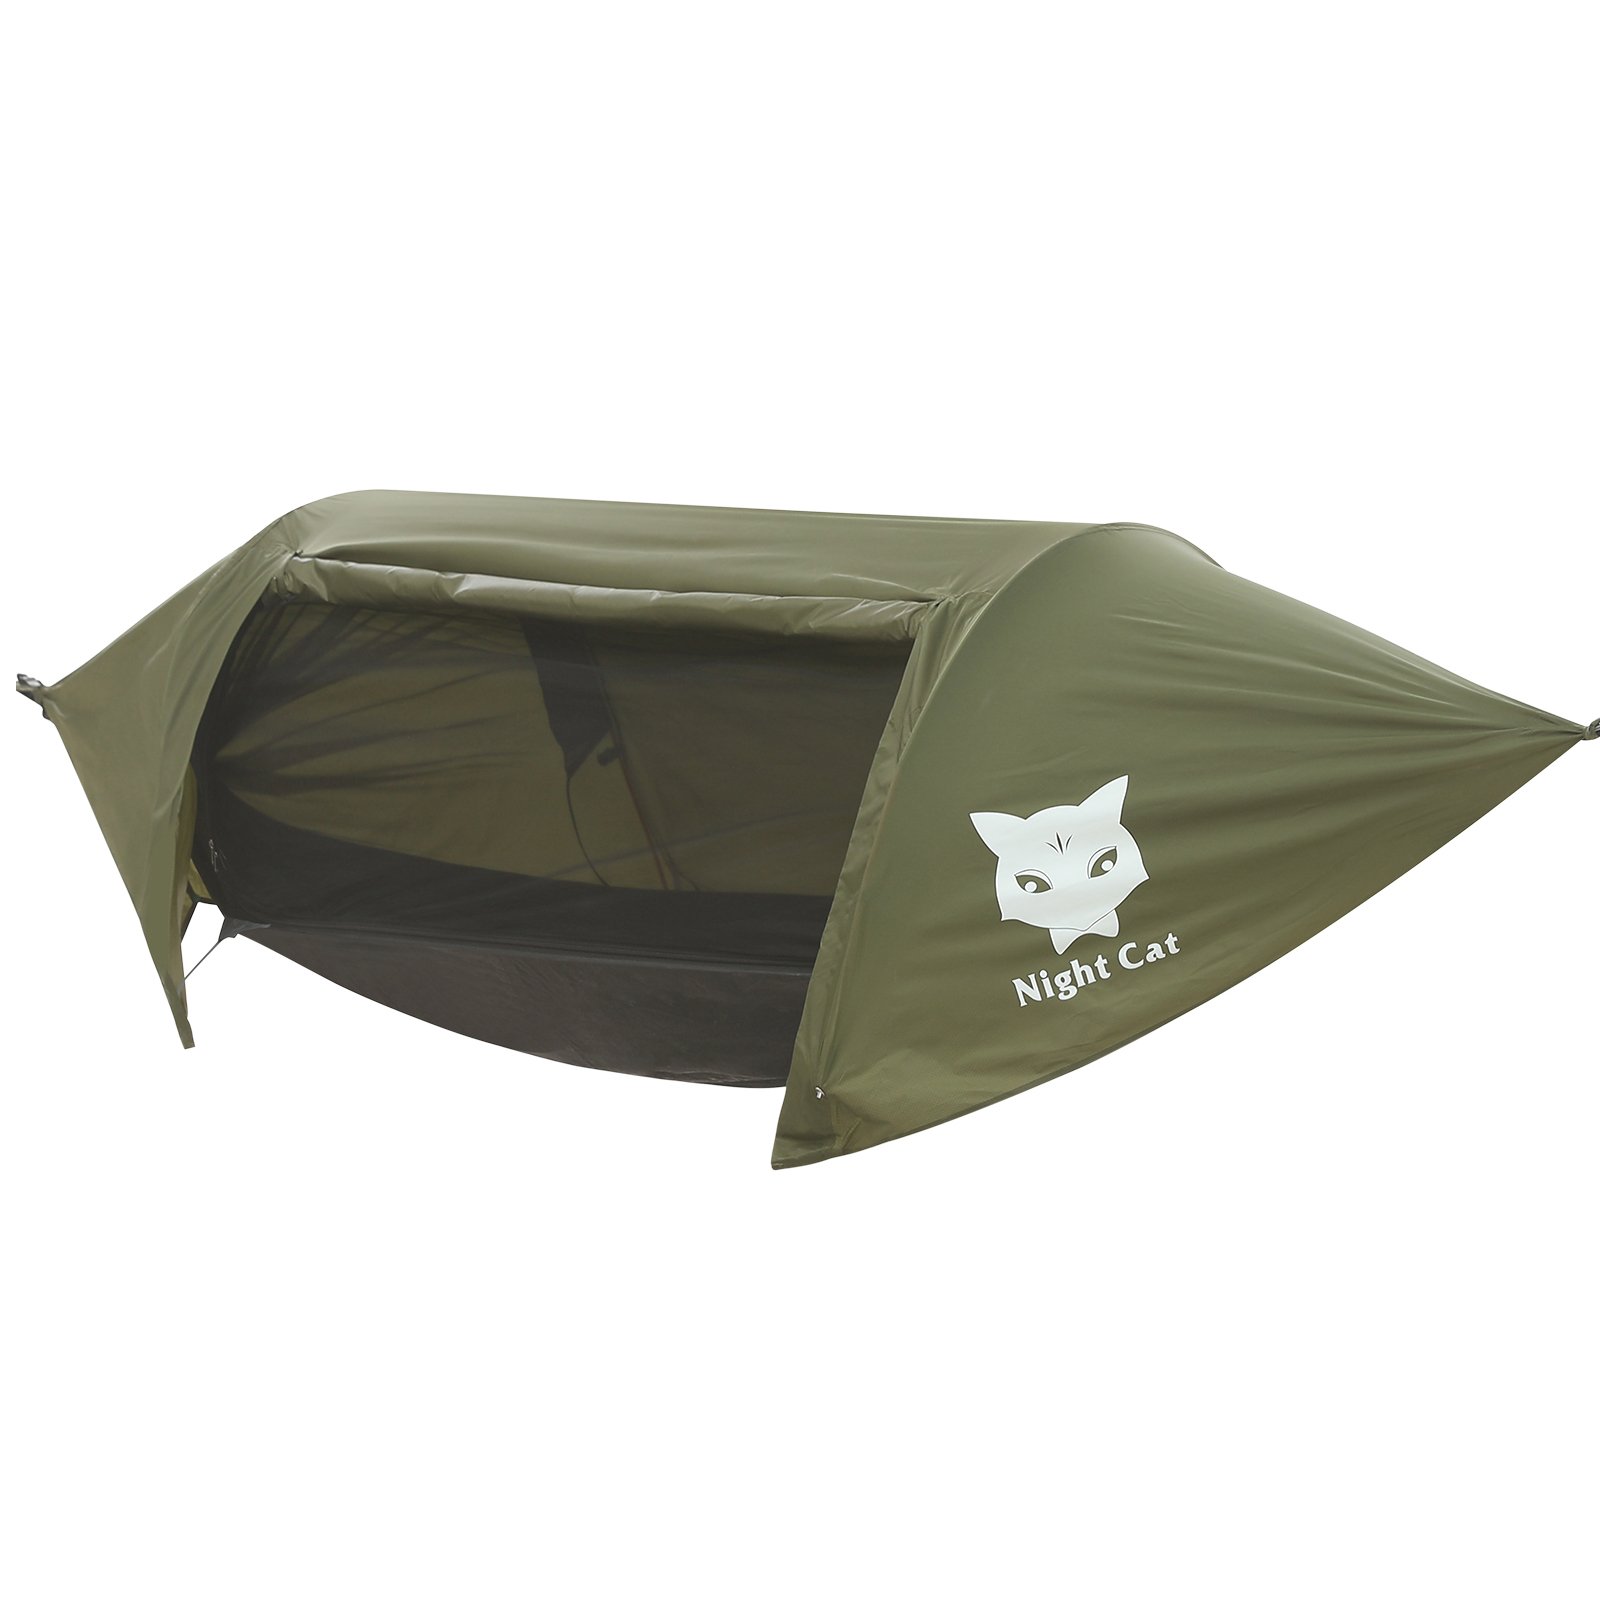 Night Cat Camping Hammock Tent with 